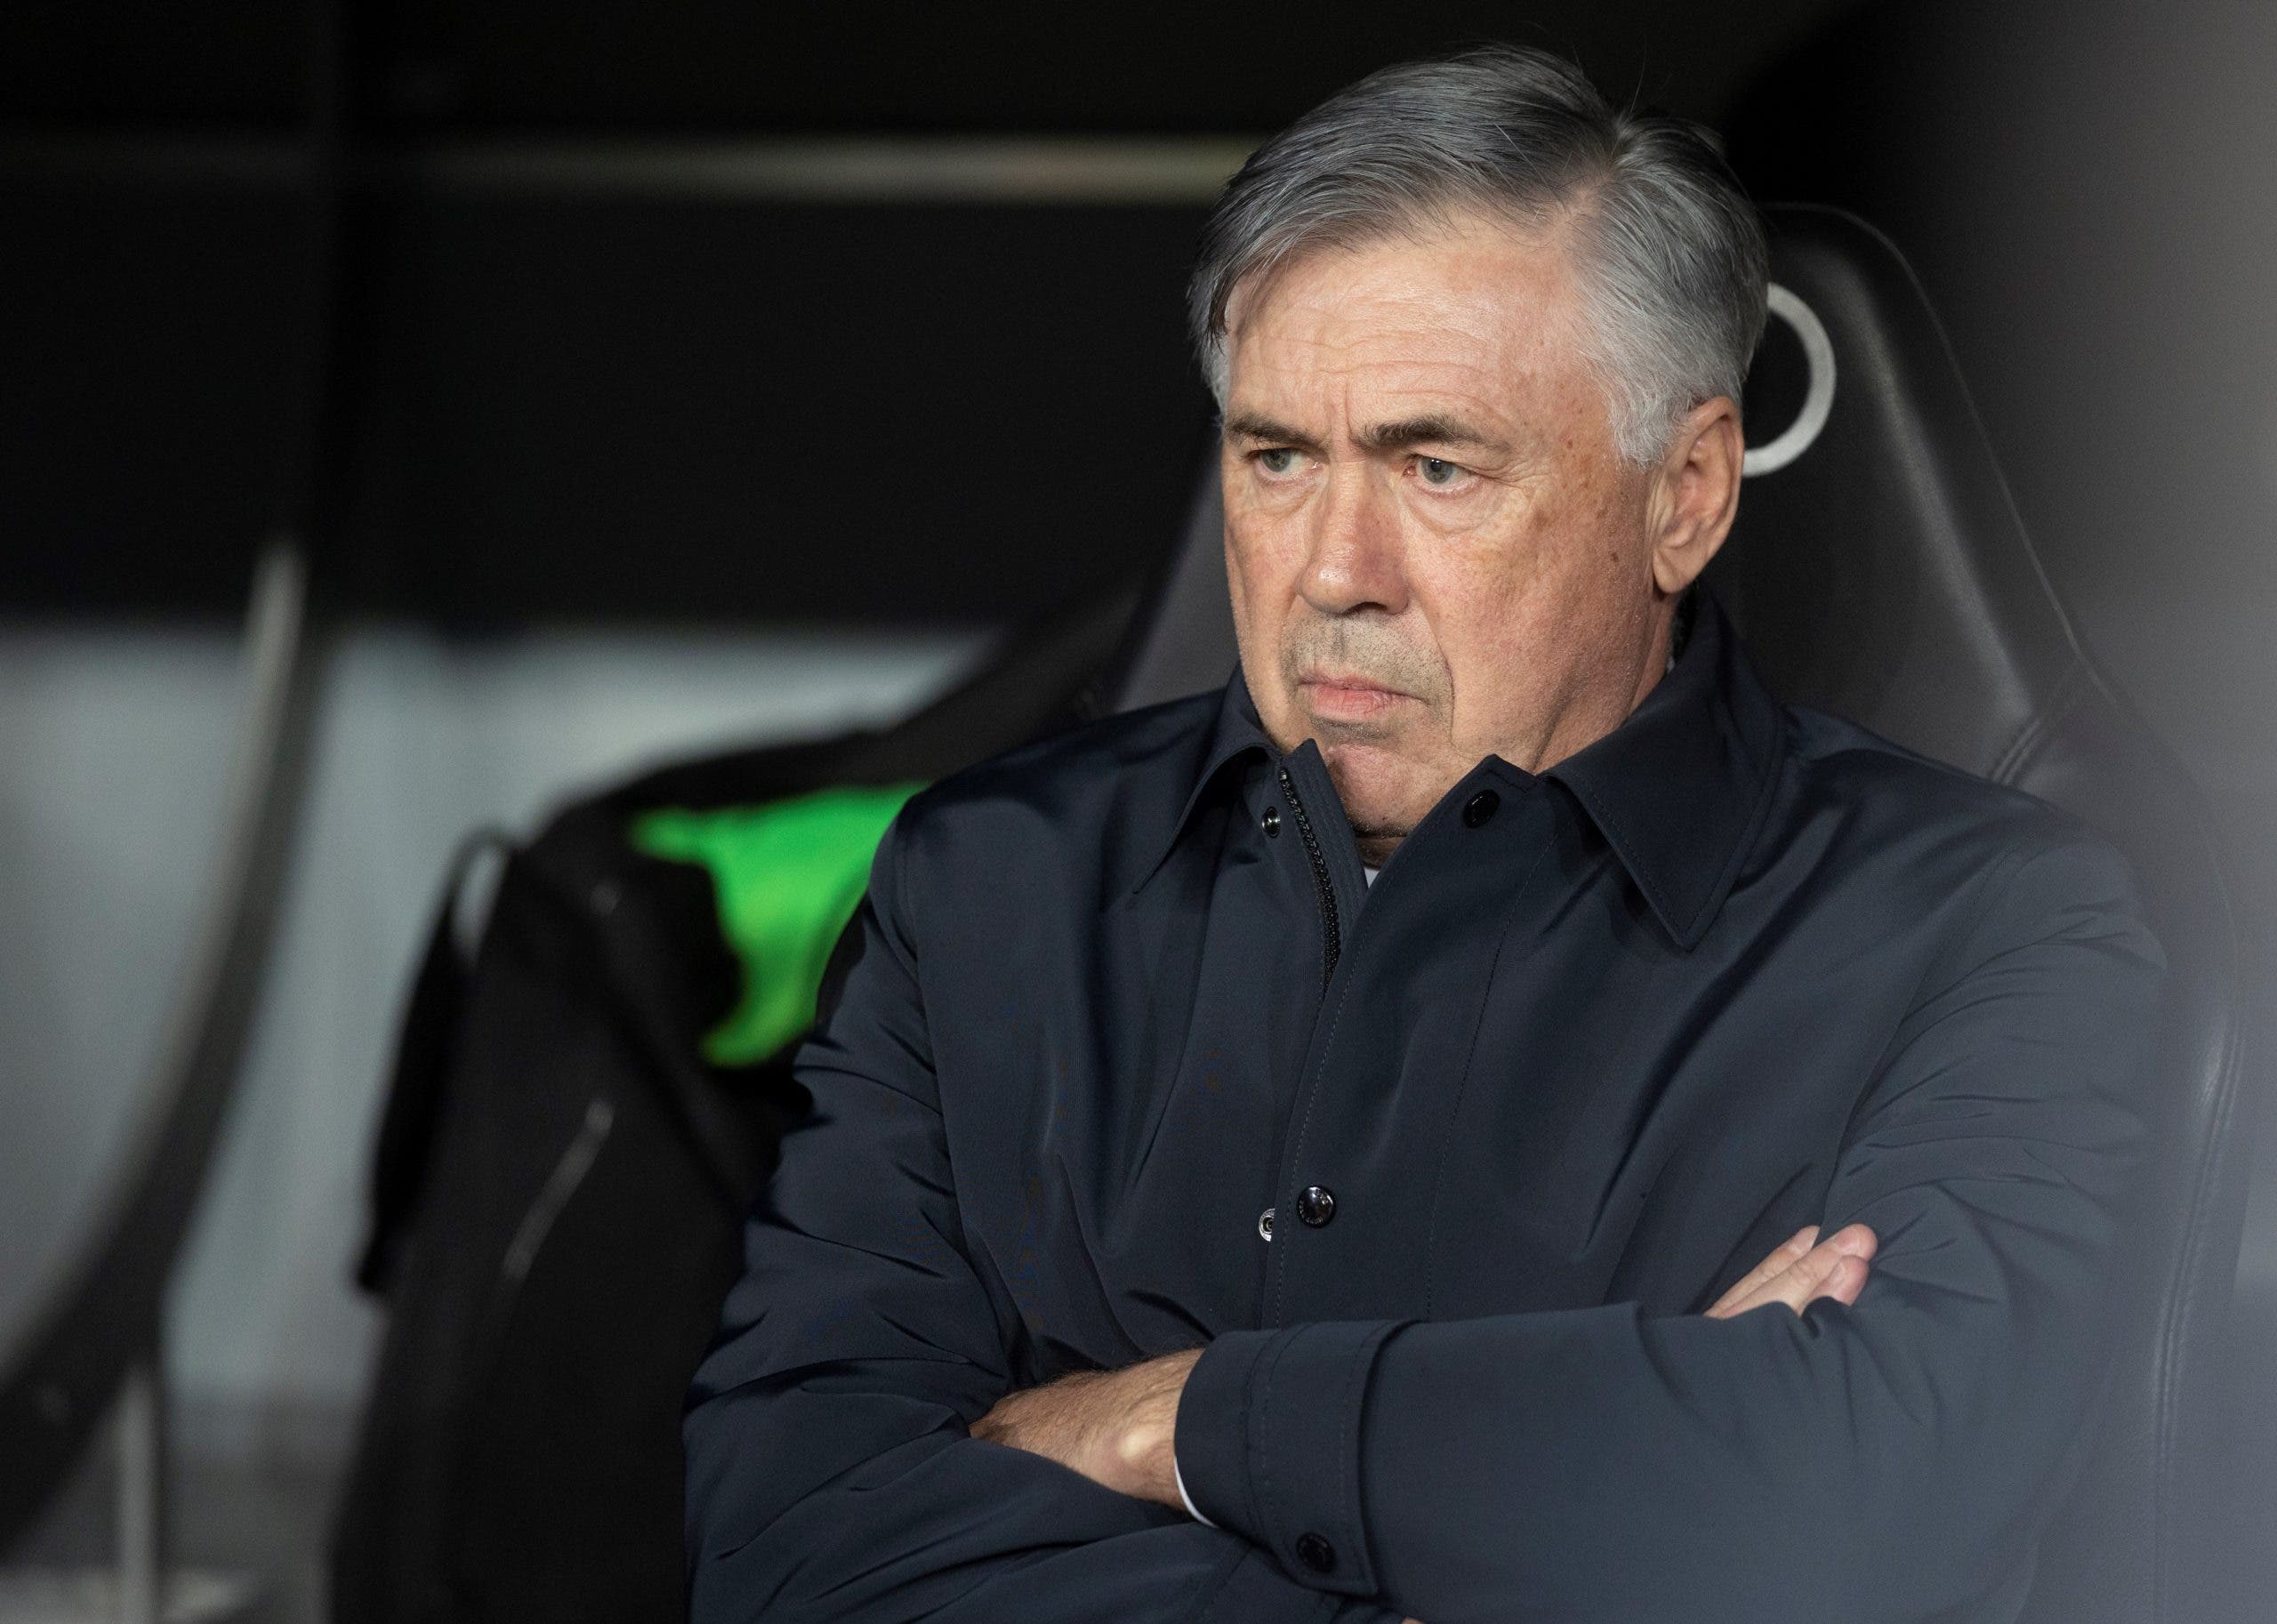 He refuses to leave Real Madrid: Ancelotti can't even see him
	

